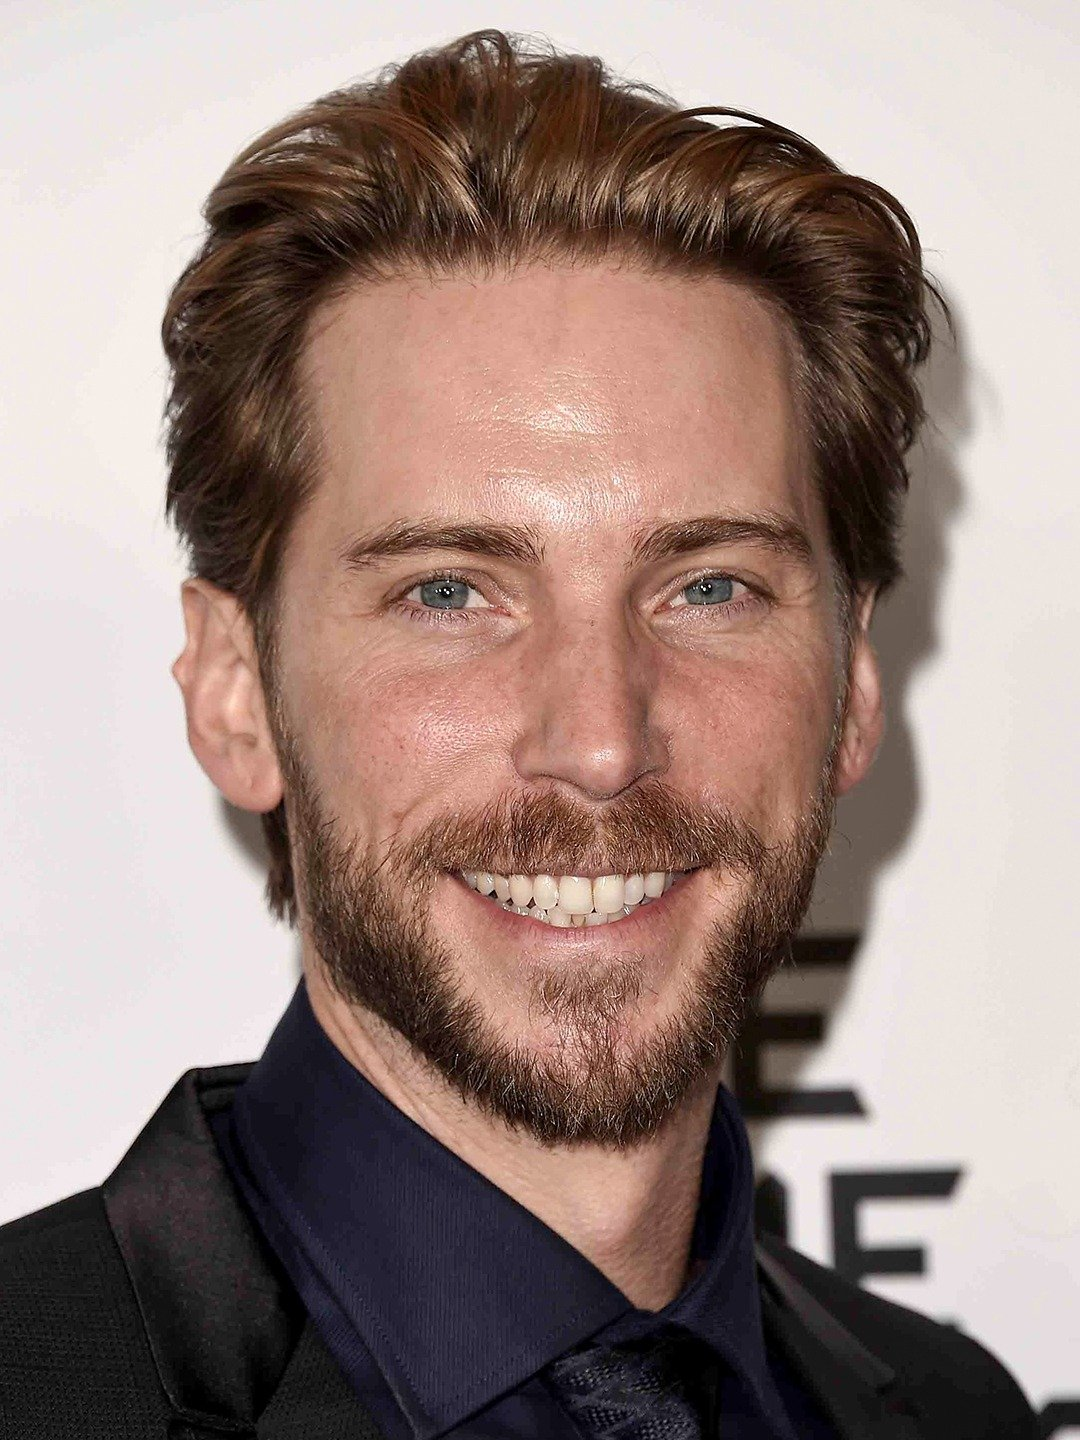 Petition · Get Troy Baker back to voice Yuri Lowell for Tales of